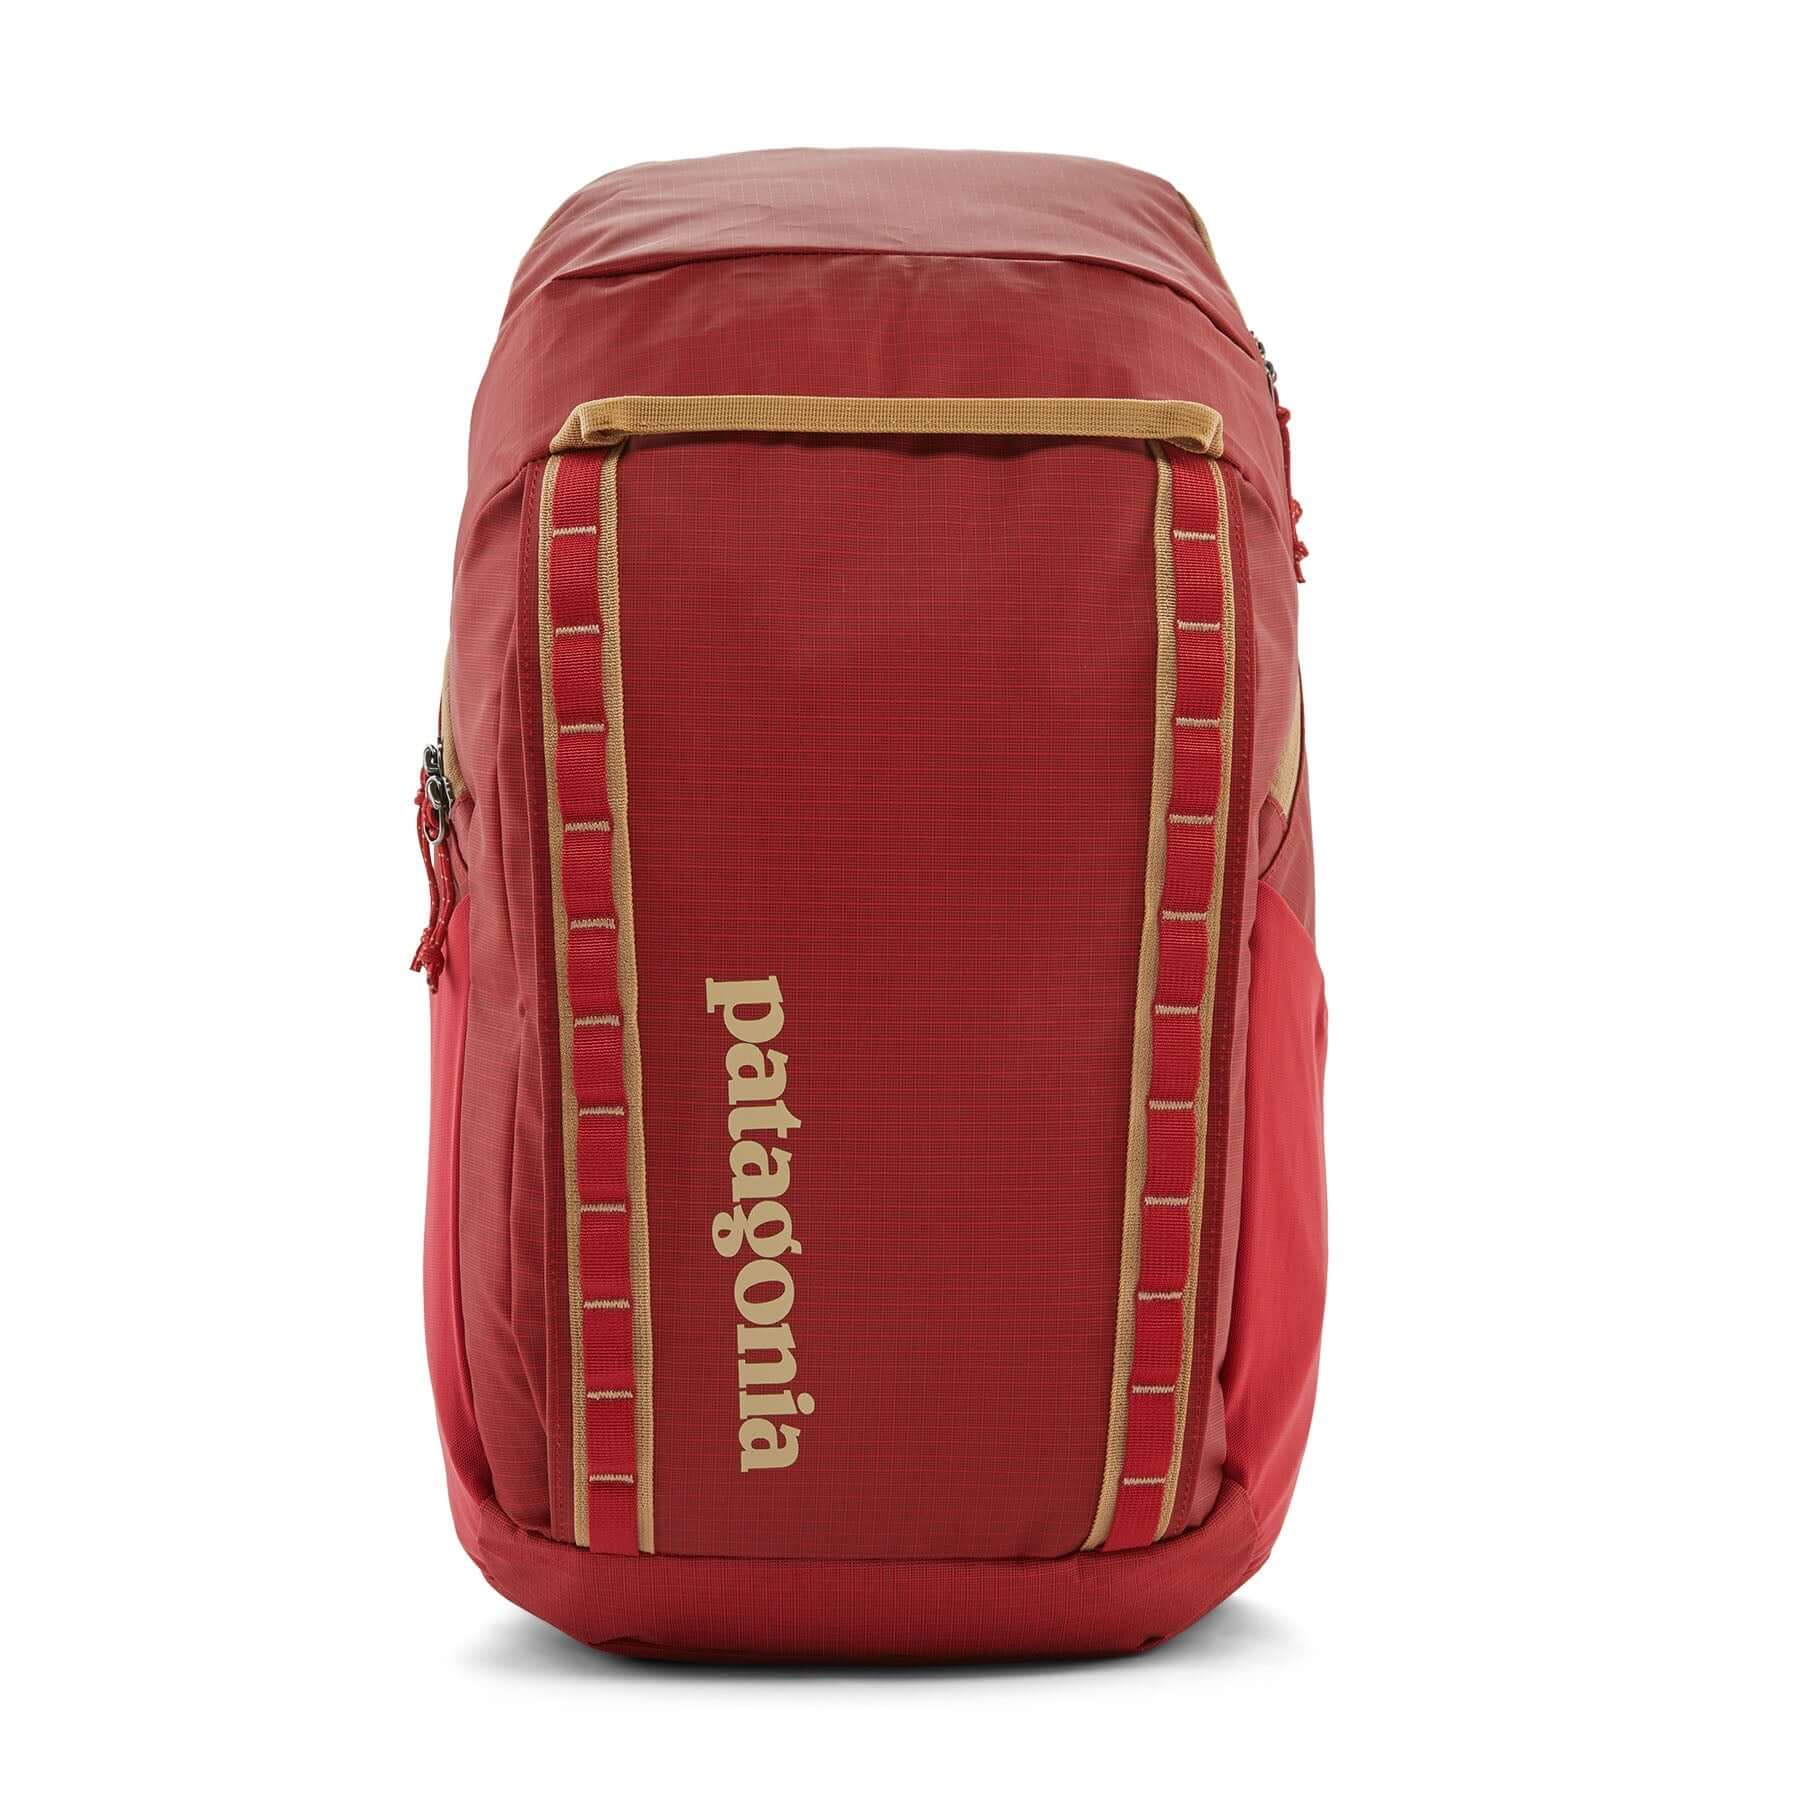 Black Hole Pack 32L in Touring Red | Patagonia Bend